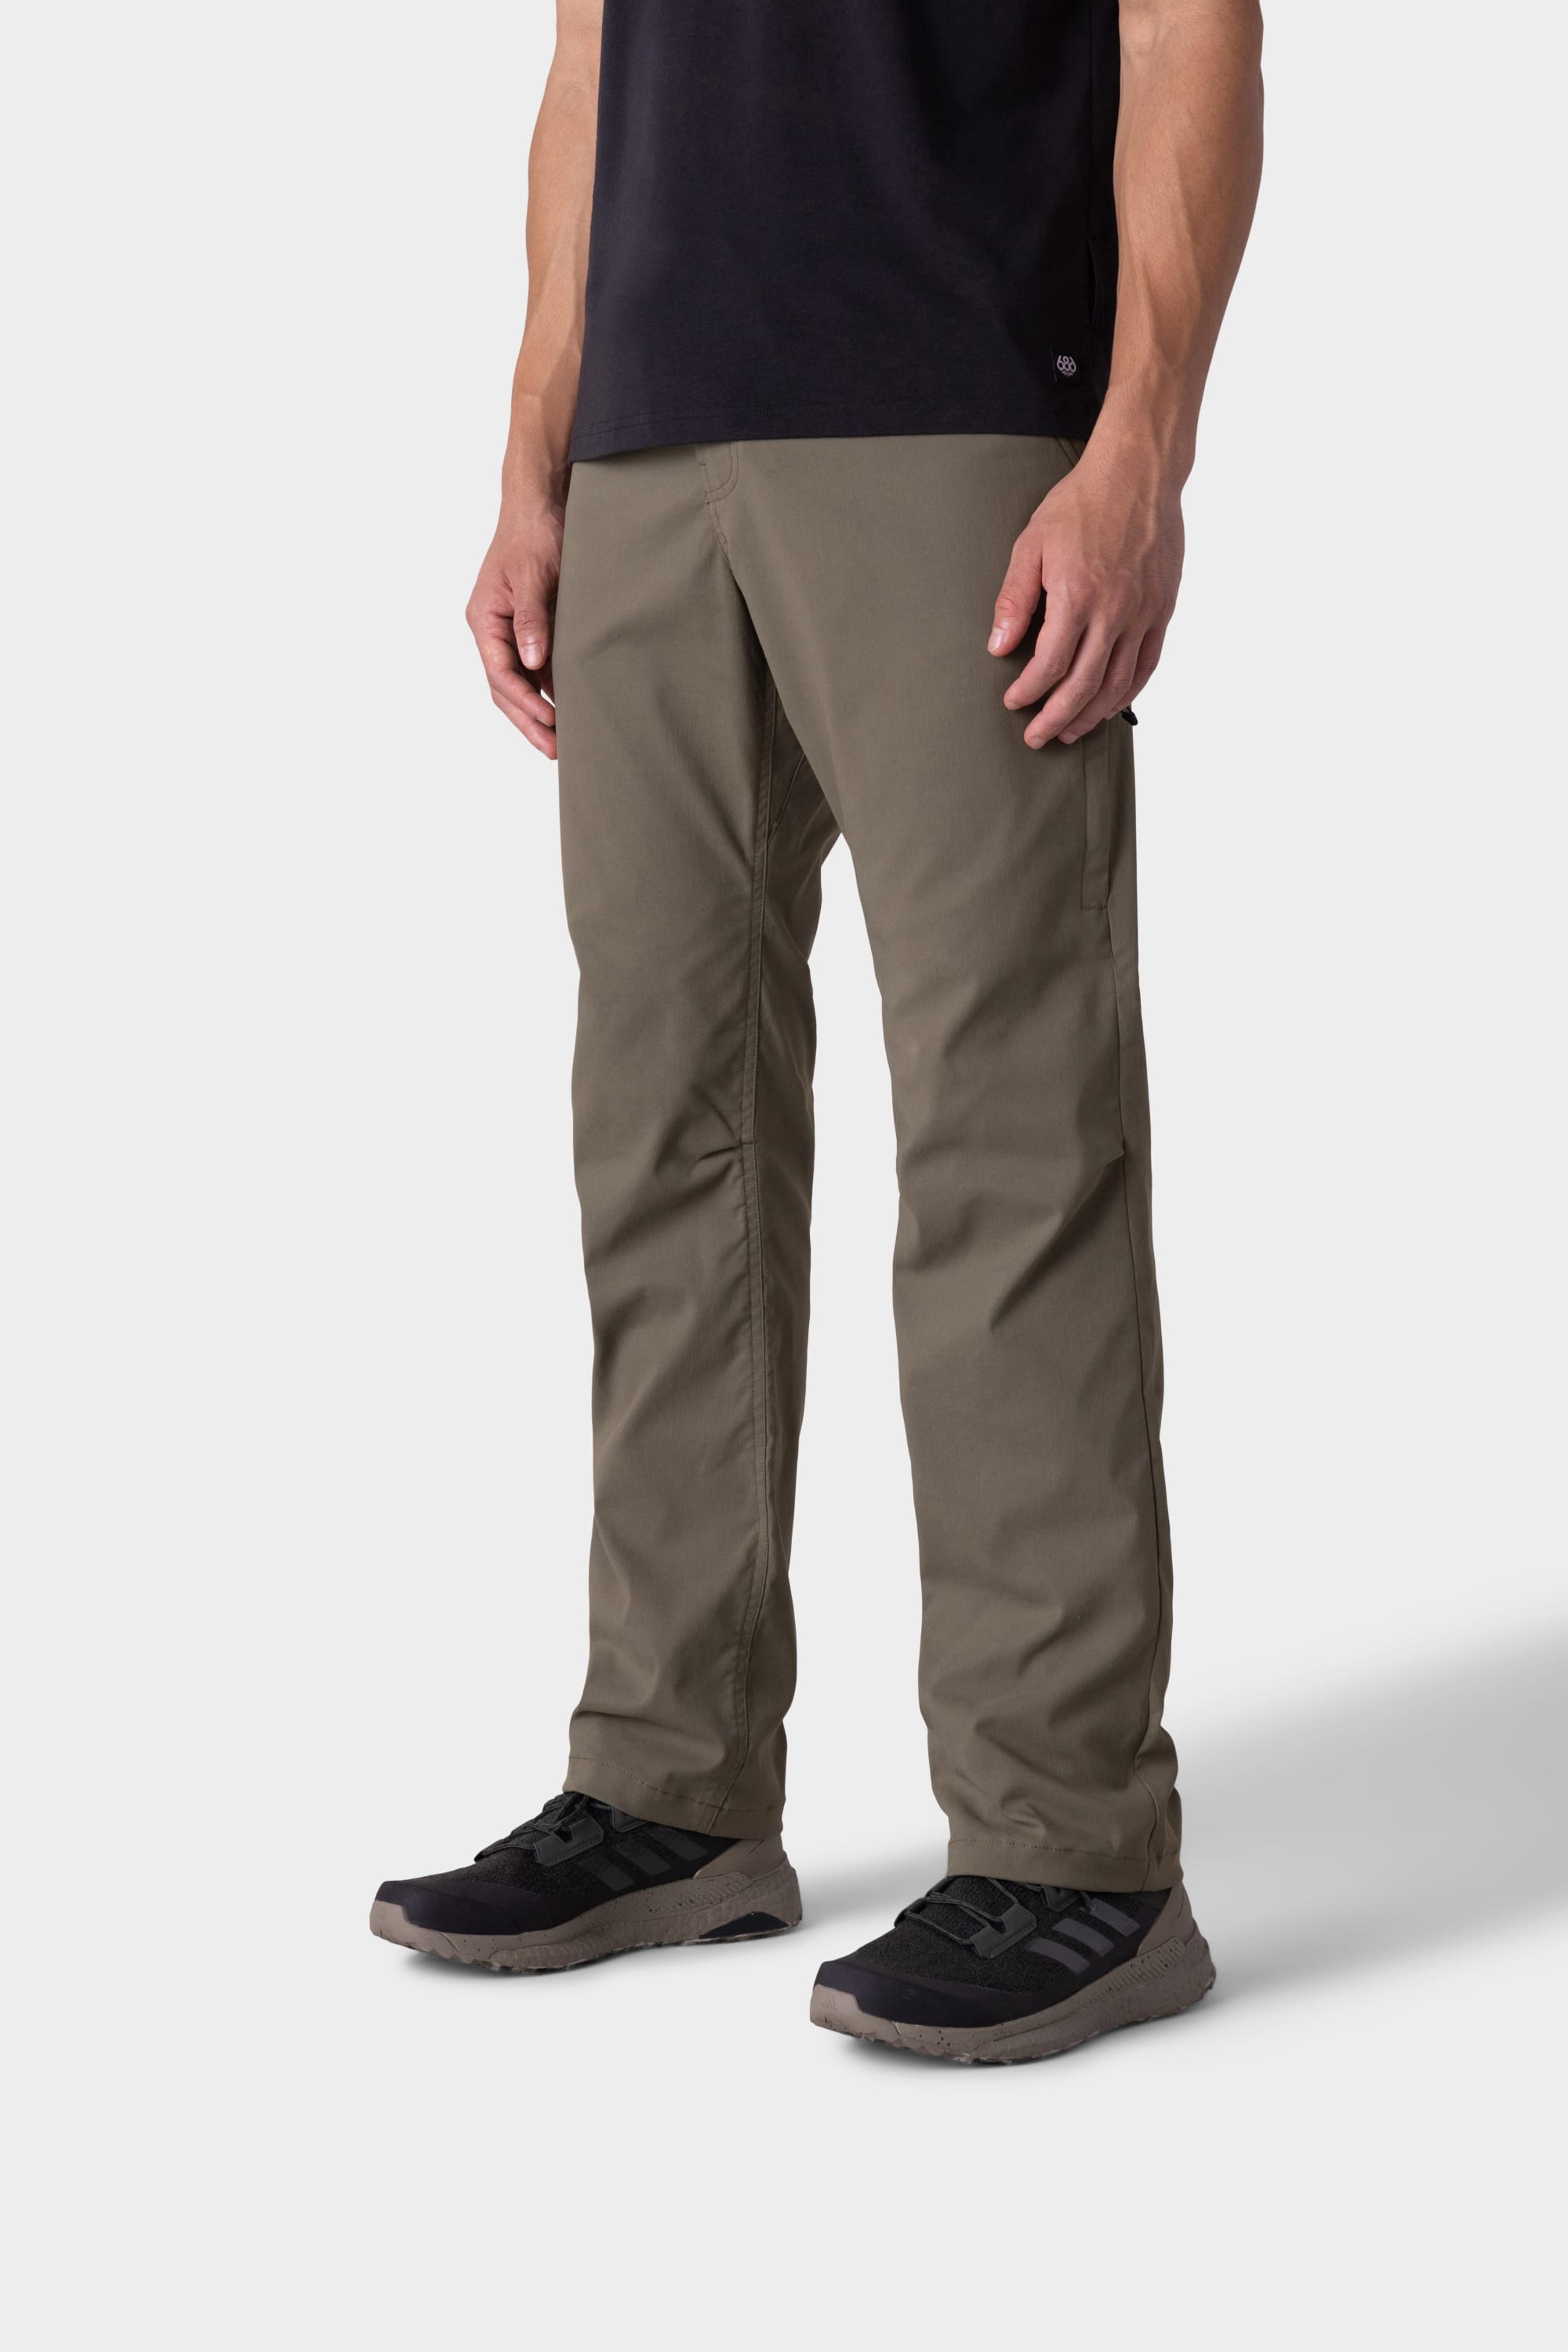 Alternate View 50 of 686 Men's Everywhere Pant - Relaxed Fit